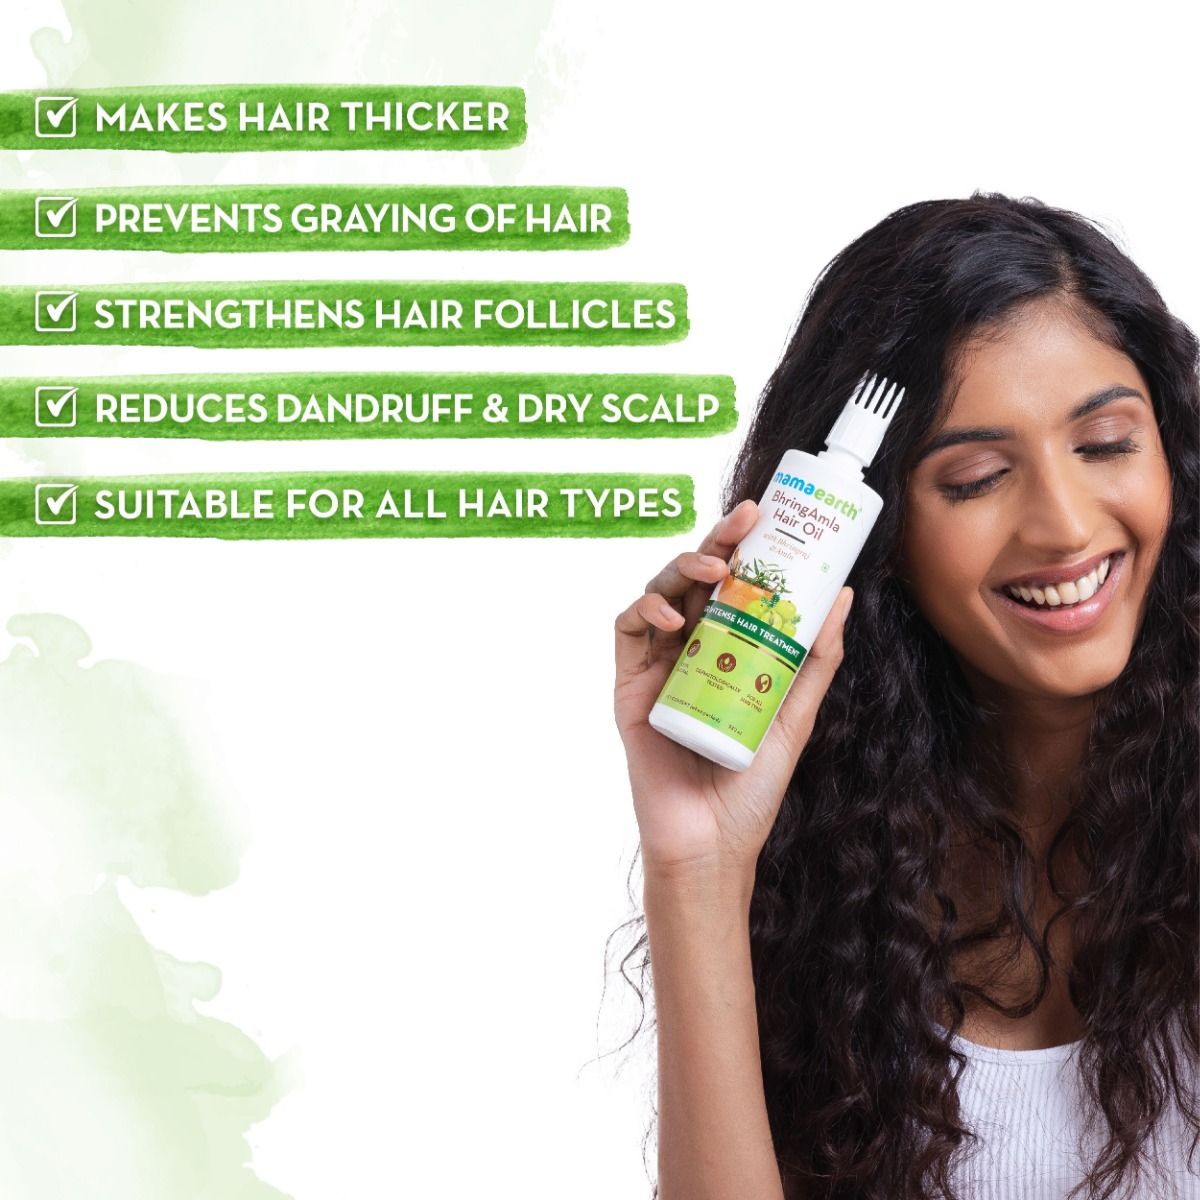 Benefits Of Amla For Hair Growth | Femina.in